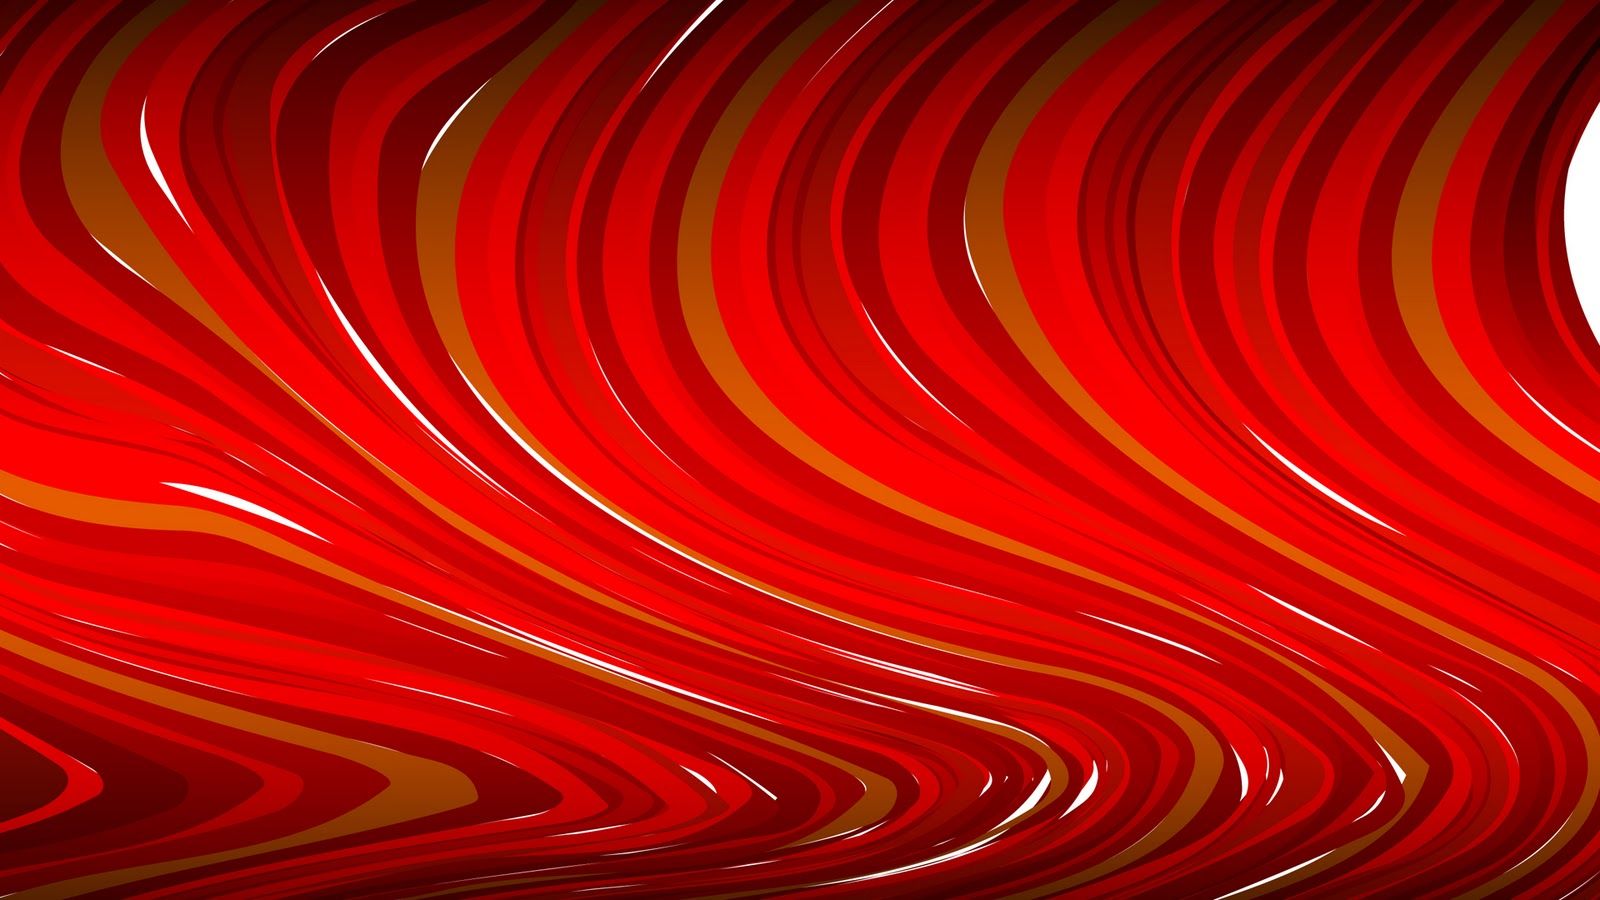 Red And Gold Wallpapers